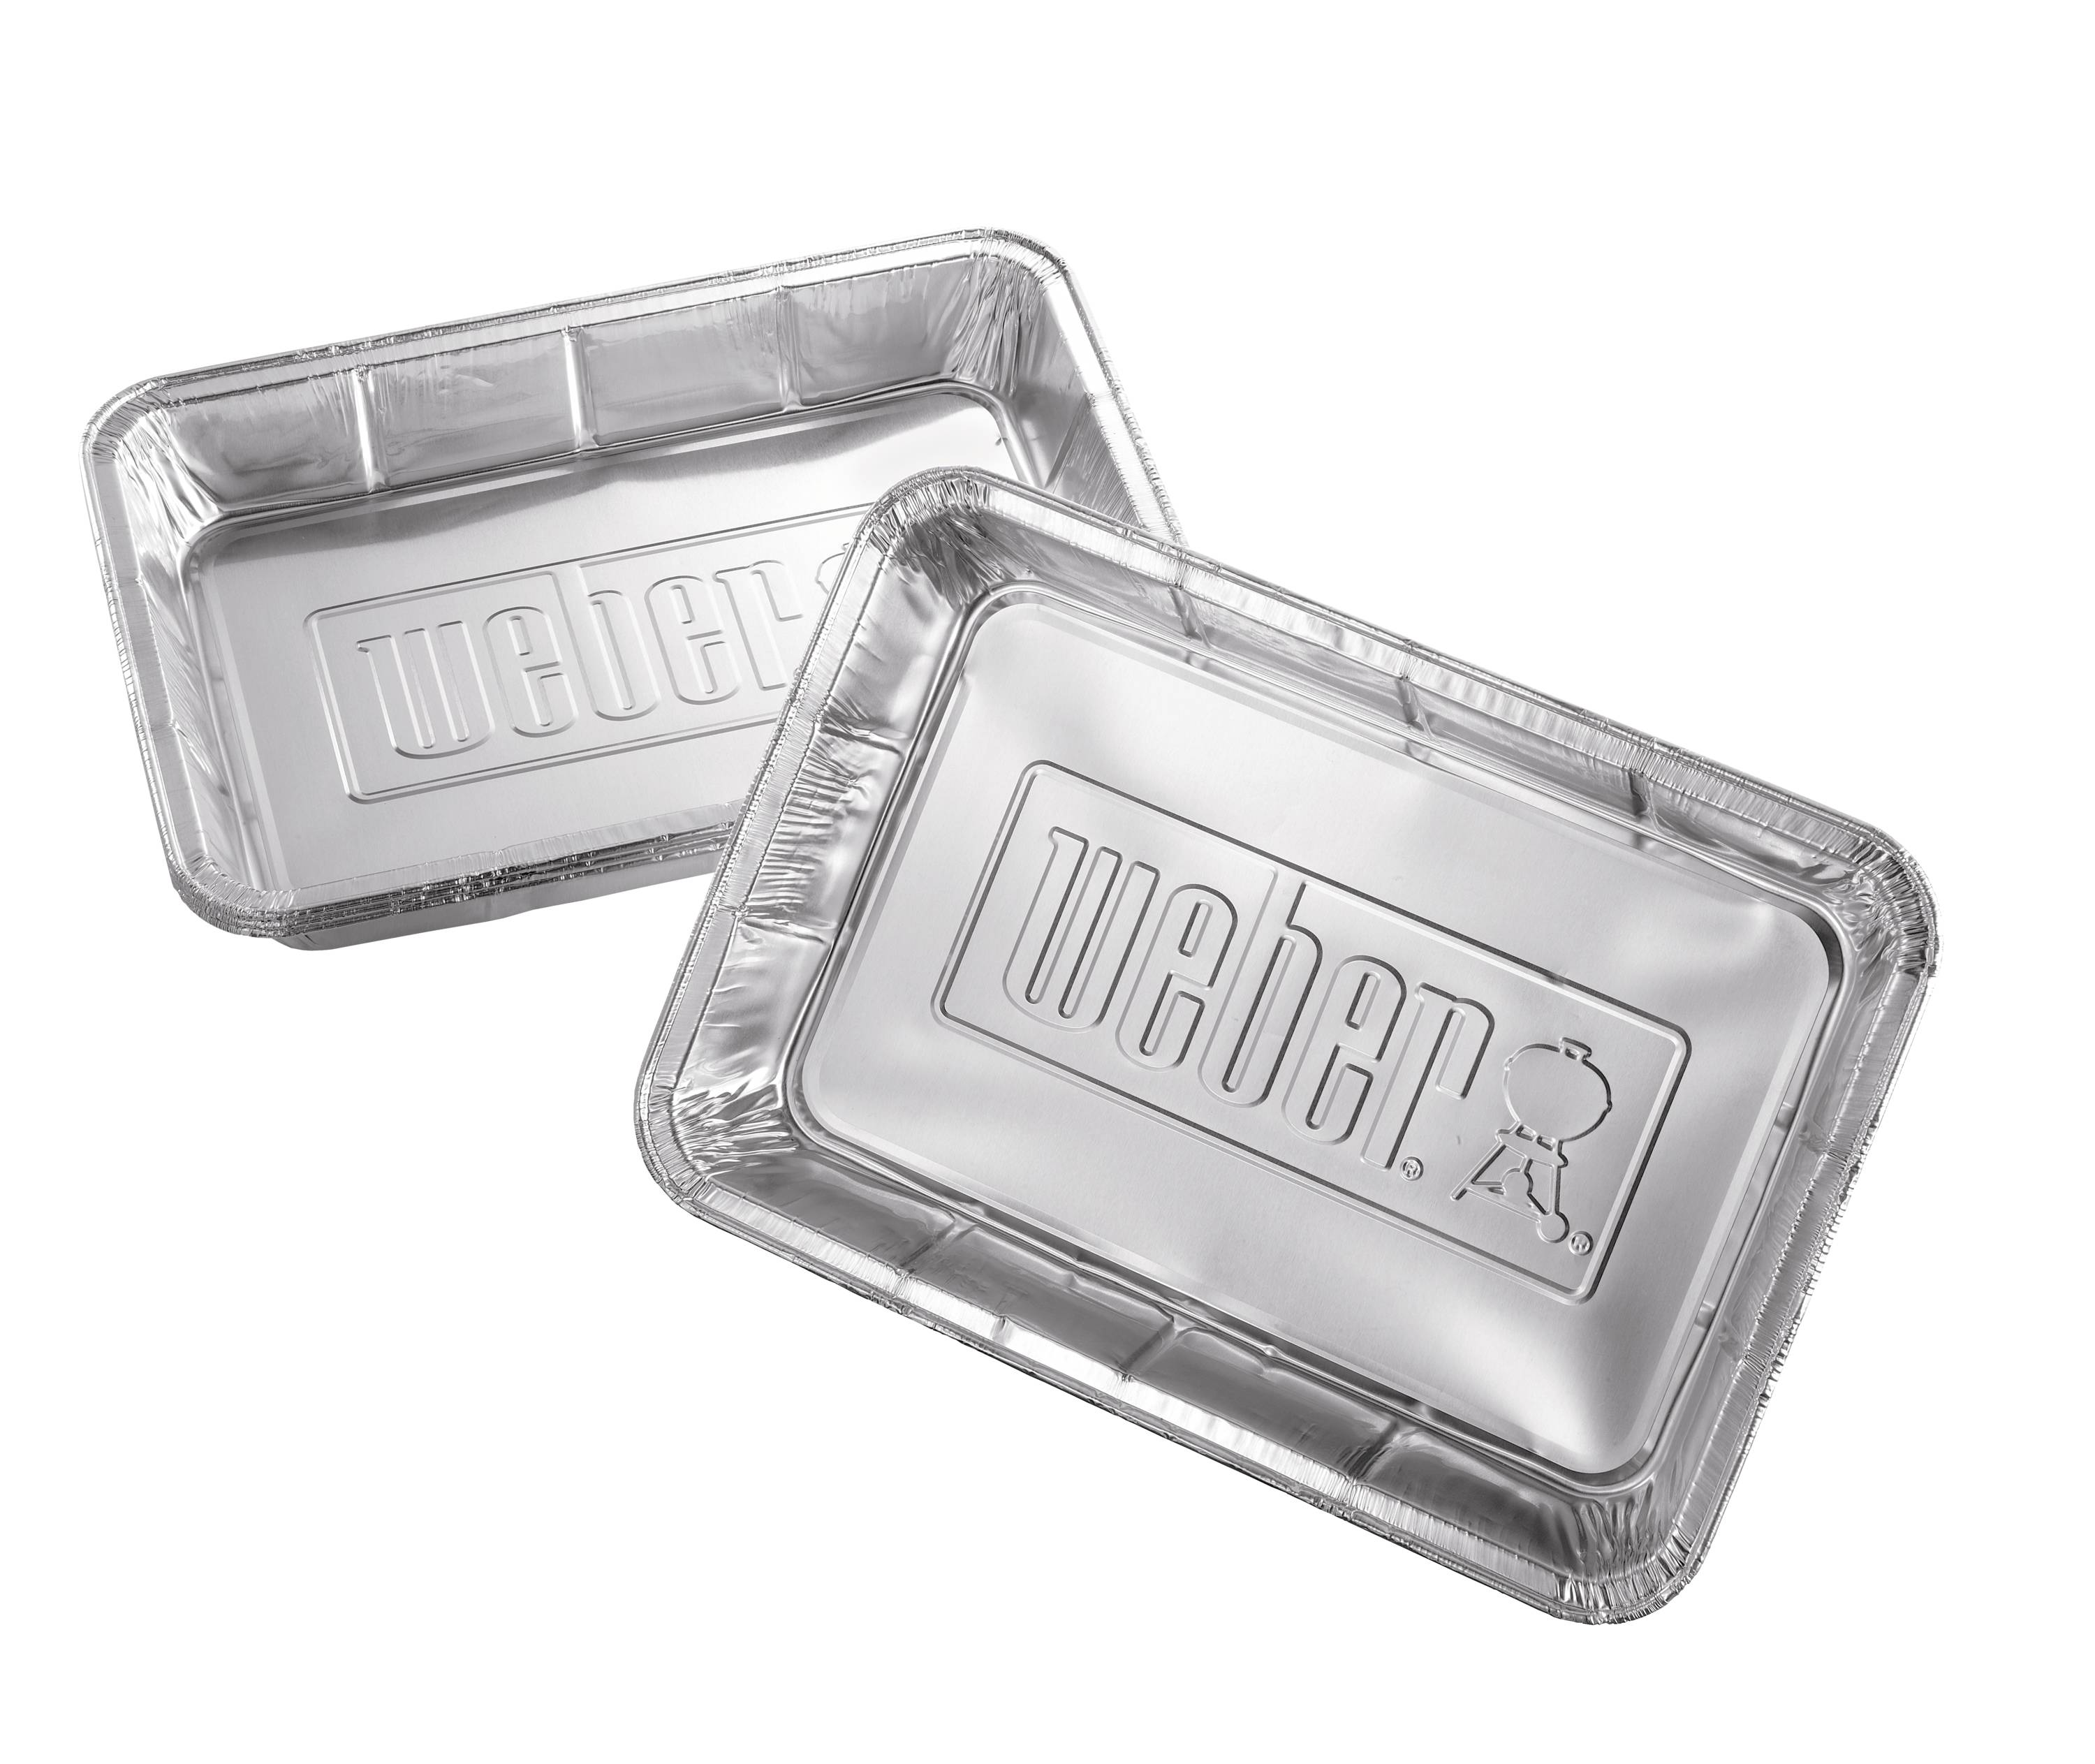 Simple foil trays for Weber cooking 